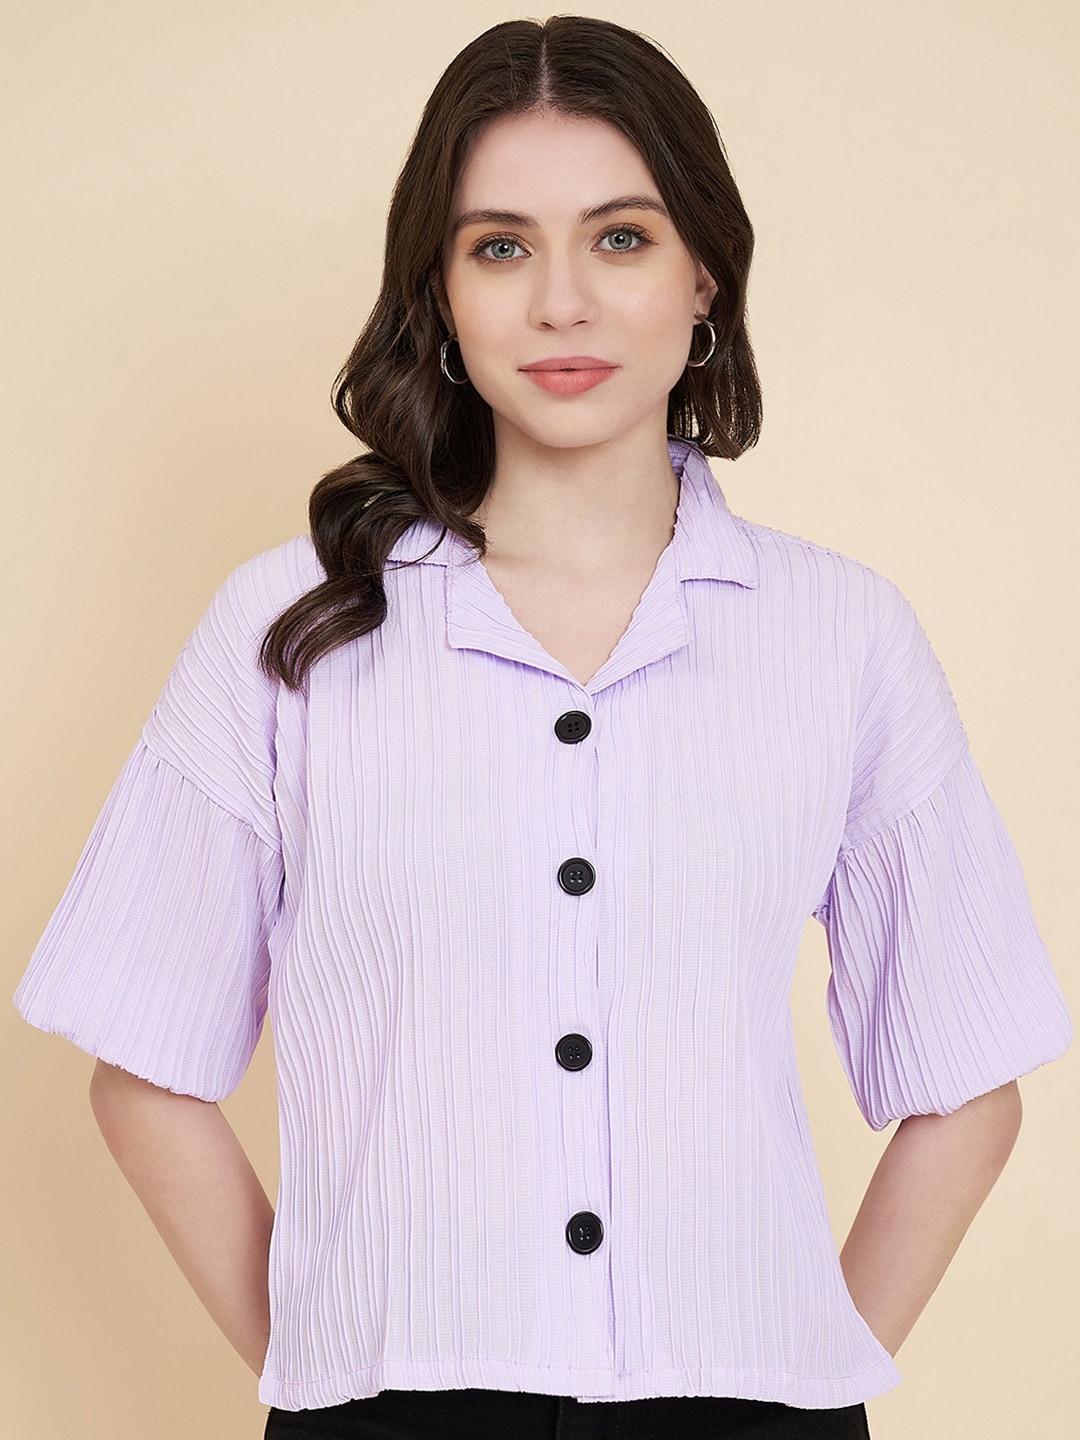 vairagee-women-lavender-classic-boxy-striped-casual-shirt